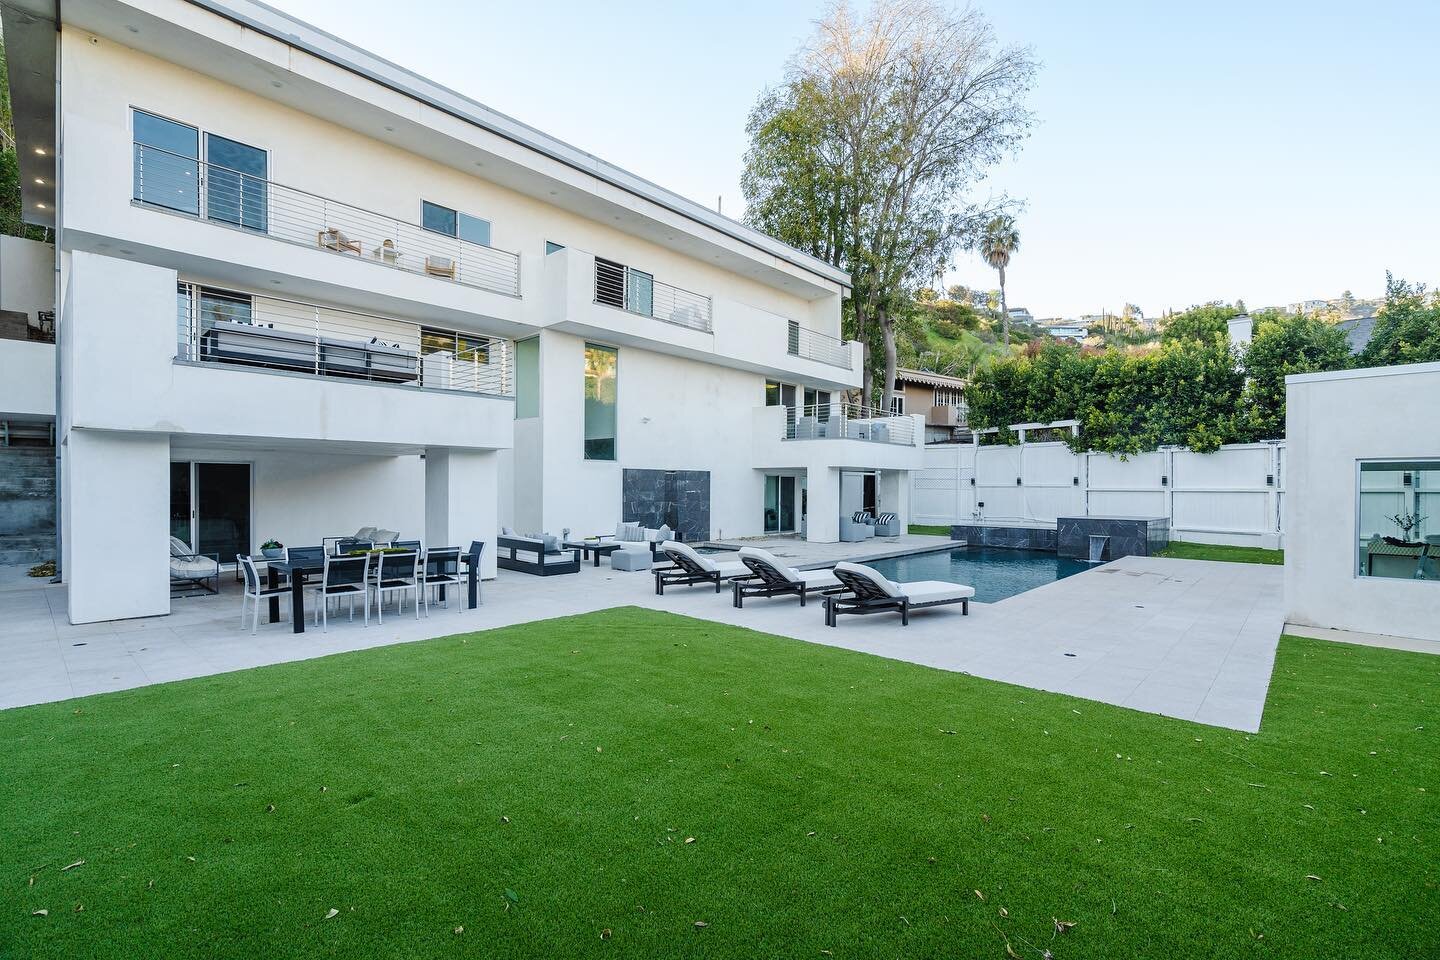 JUST LEASED | 📍St Ives Dr, Los Angeles 90069 | St Ives offers the ultimate in Hollywood Hills luxury. Enter this spacious home with an open floor plan and indoor/outdoor living and relish the sweeping views from various areas of this fabulous home. 